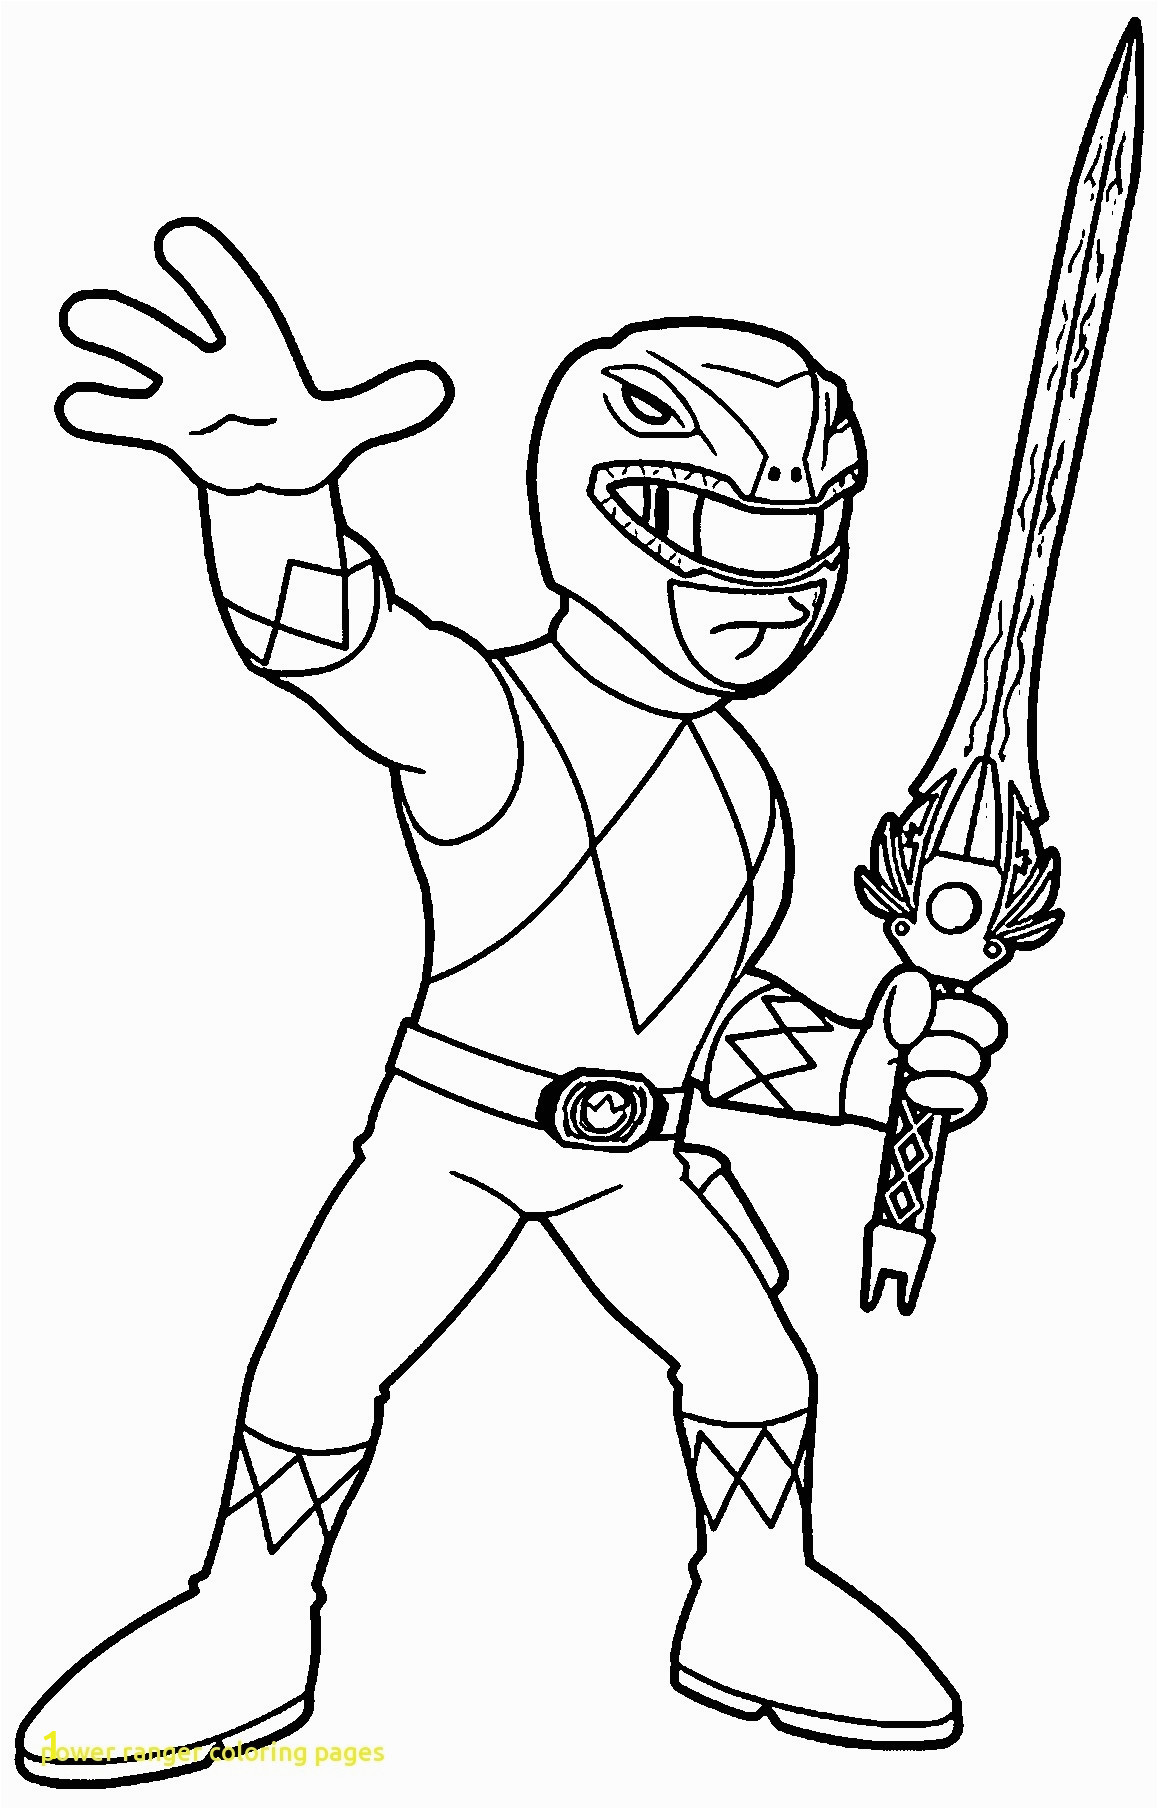 Power Rangers Dino Charge Energems Coloring Pages Power Rangers Dino Charge Coloring Pages Coloring Pages